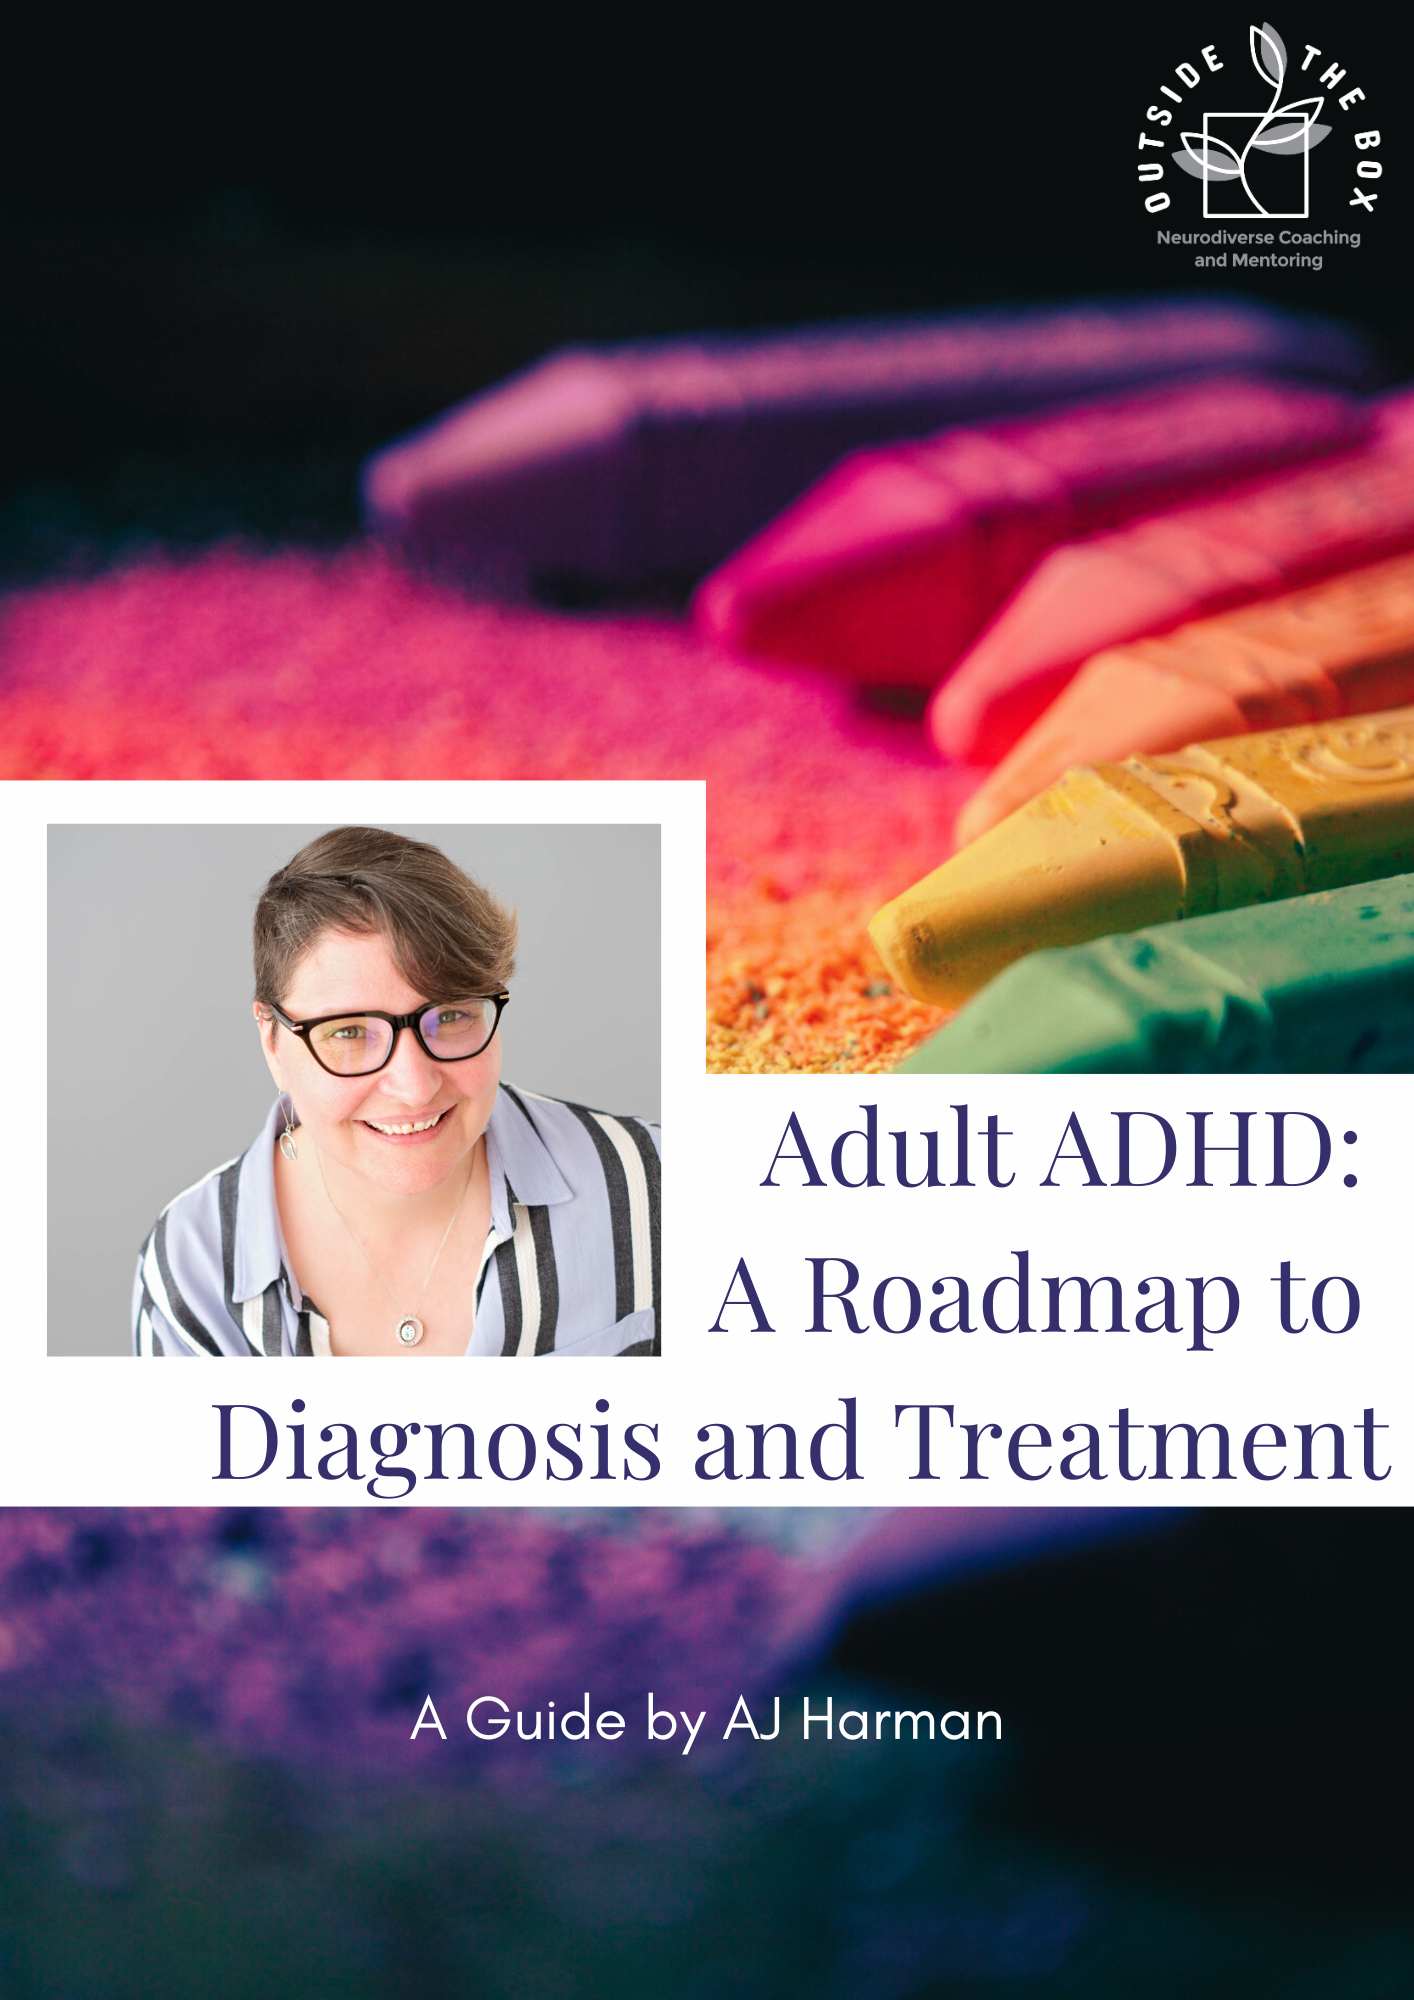 Adult ADHD A Roadmap to Diagnosis and Treatment